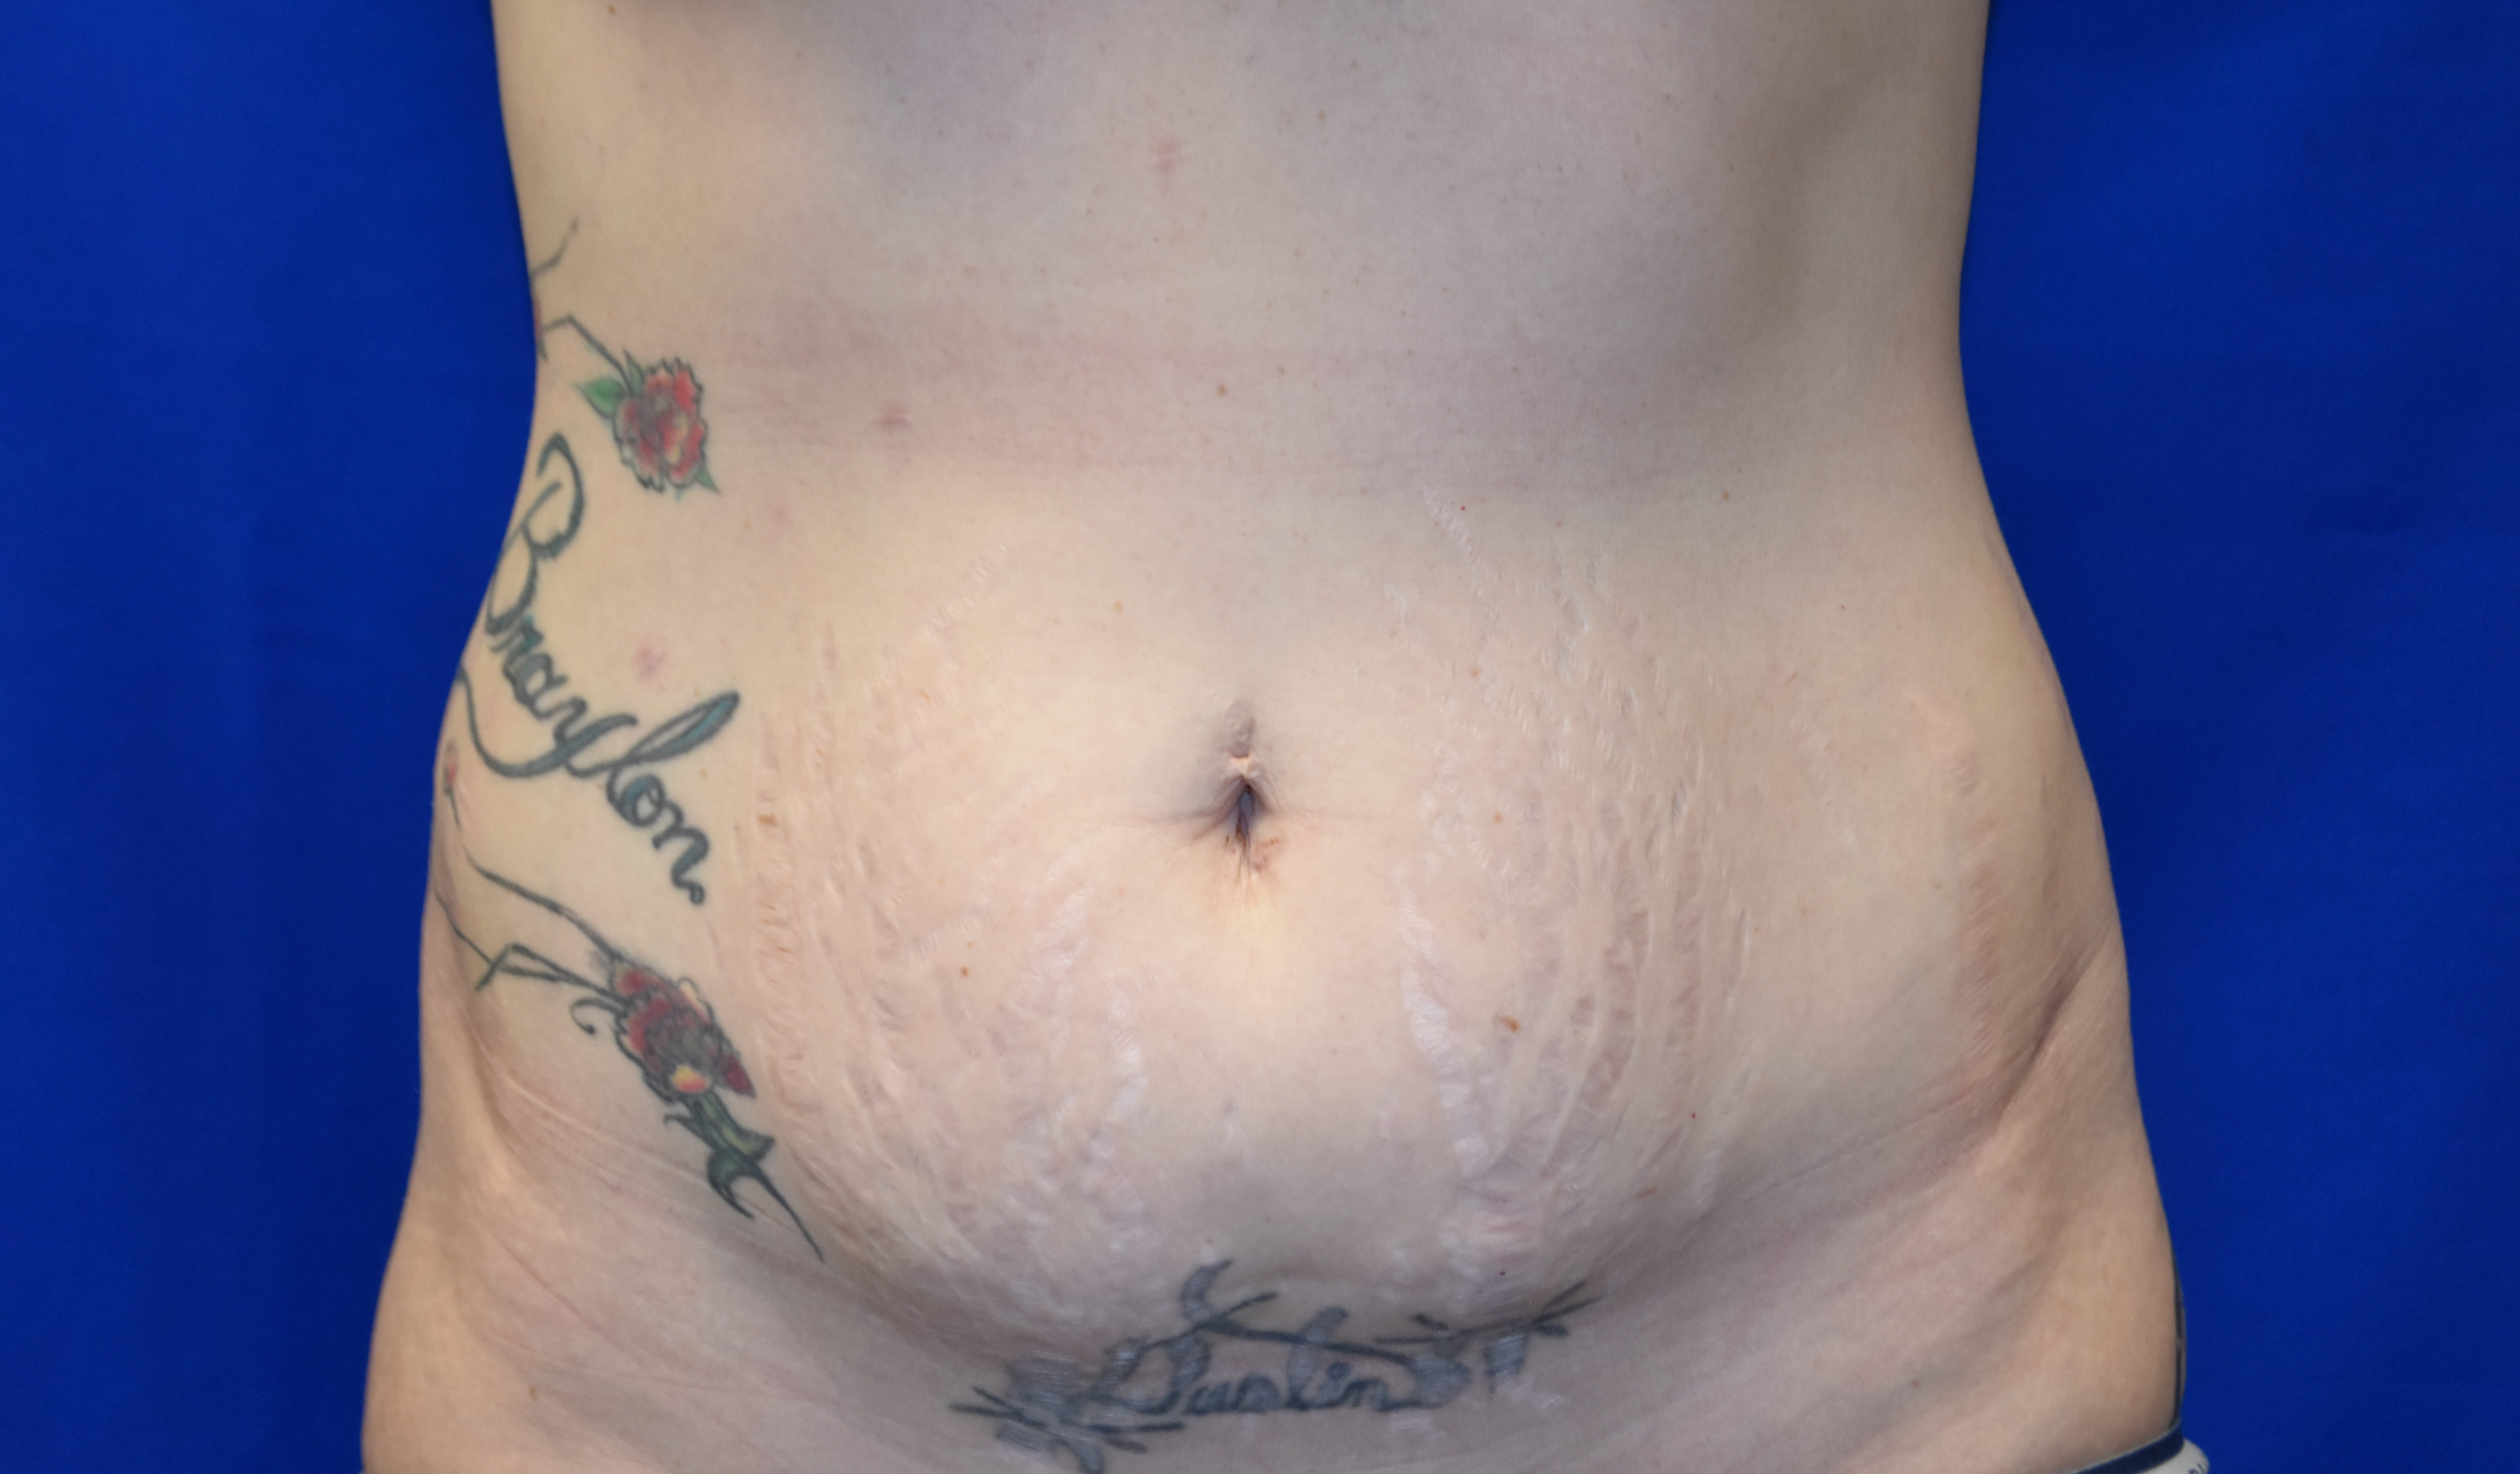 Before-abdominoplasty front